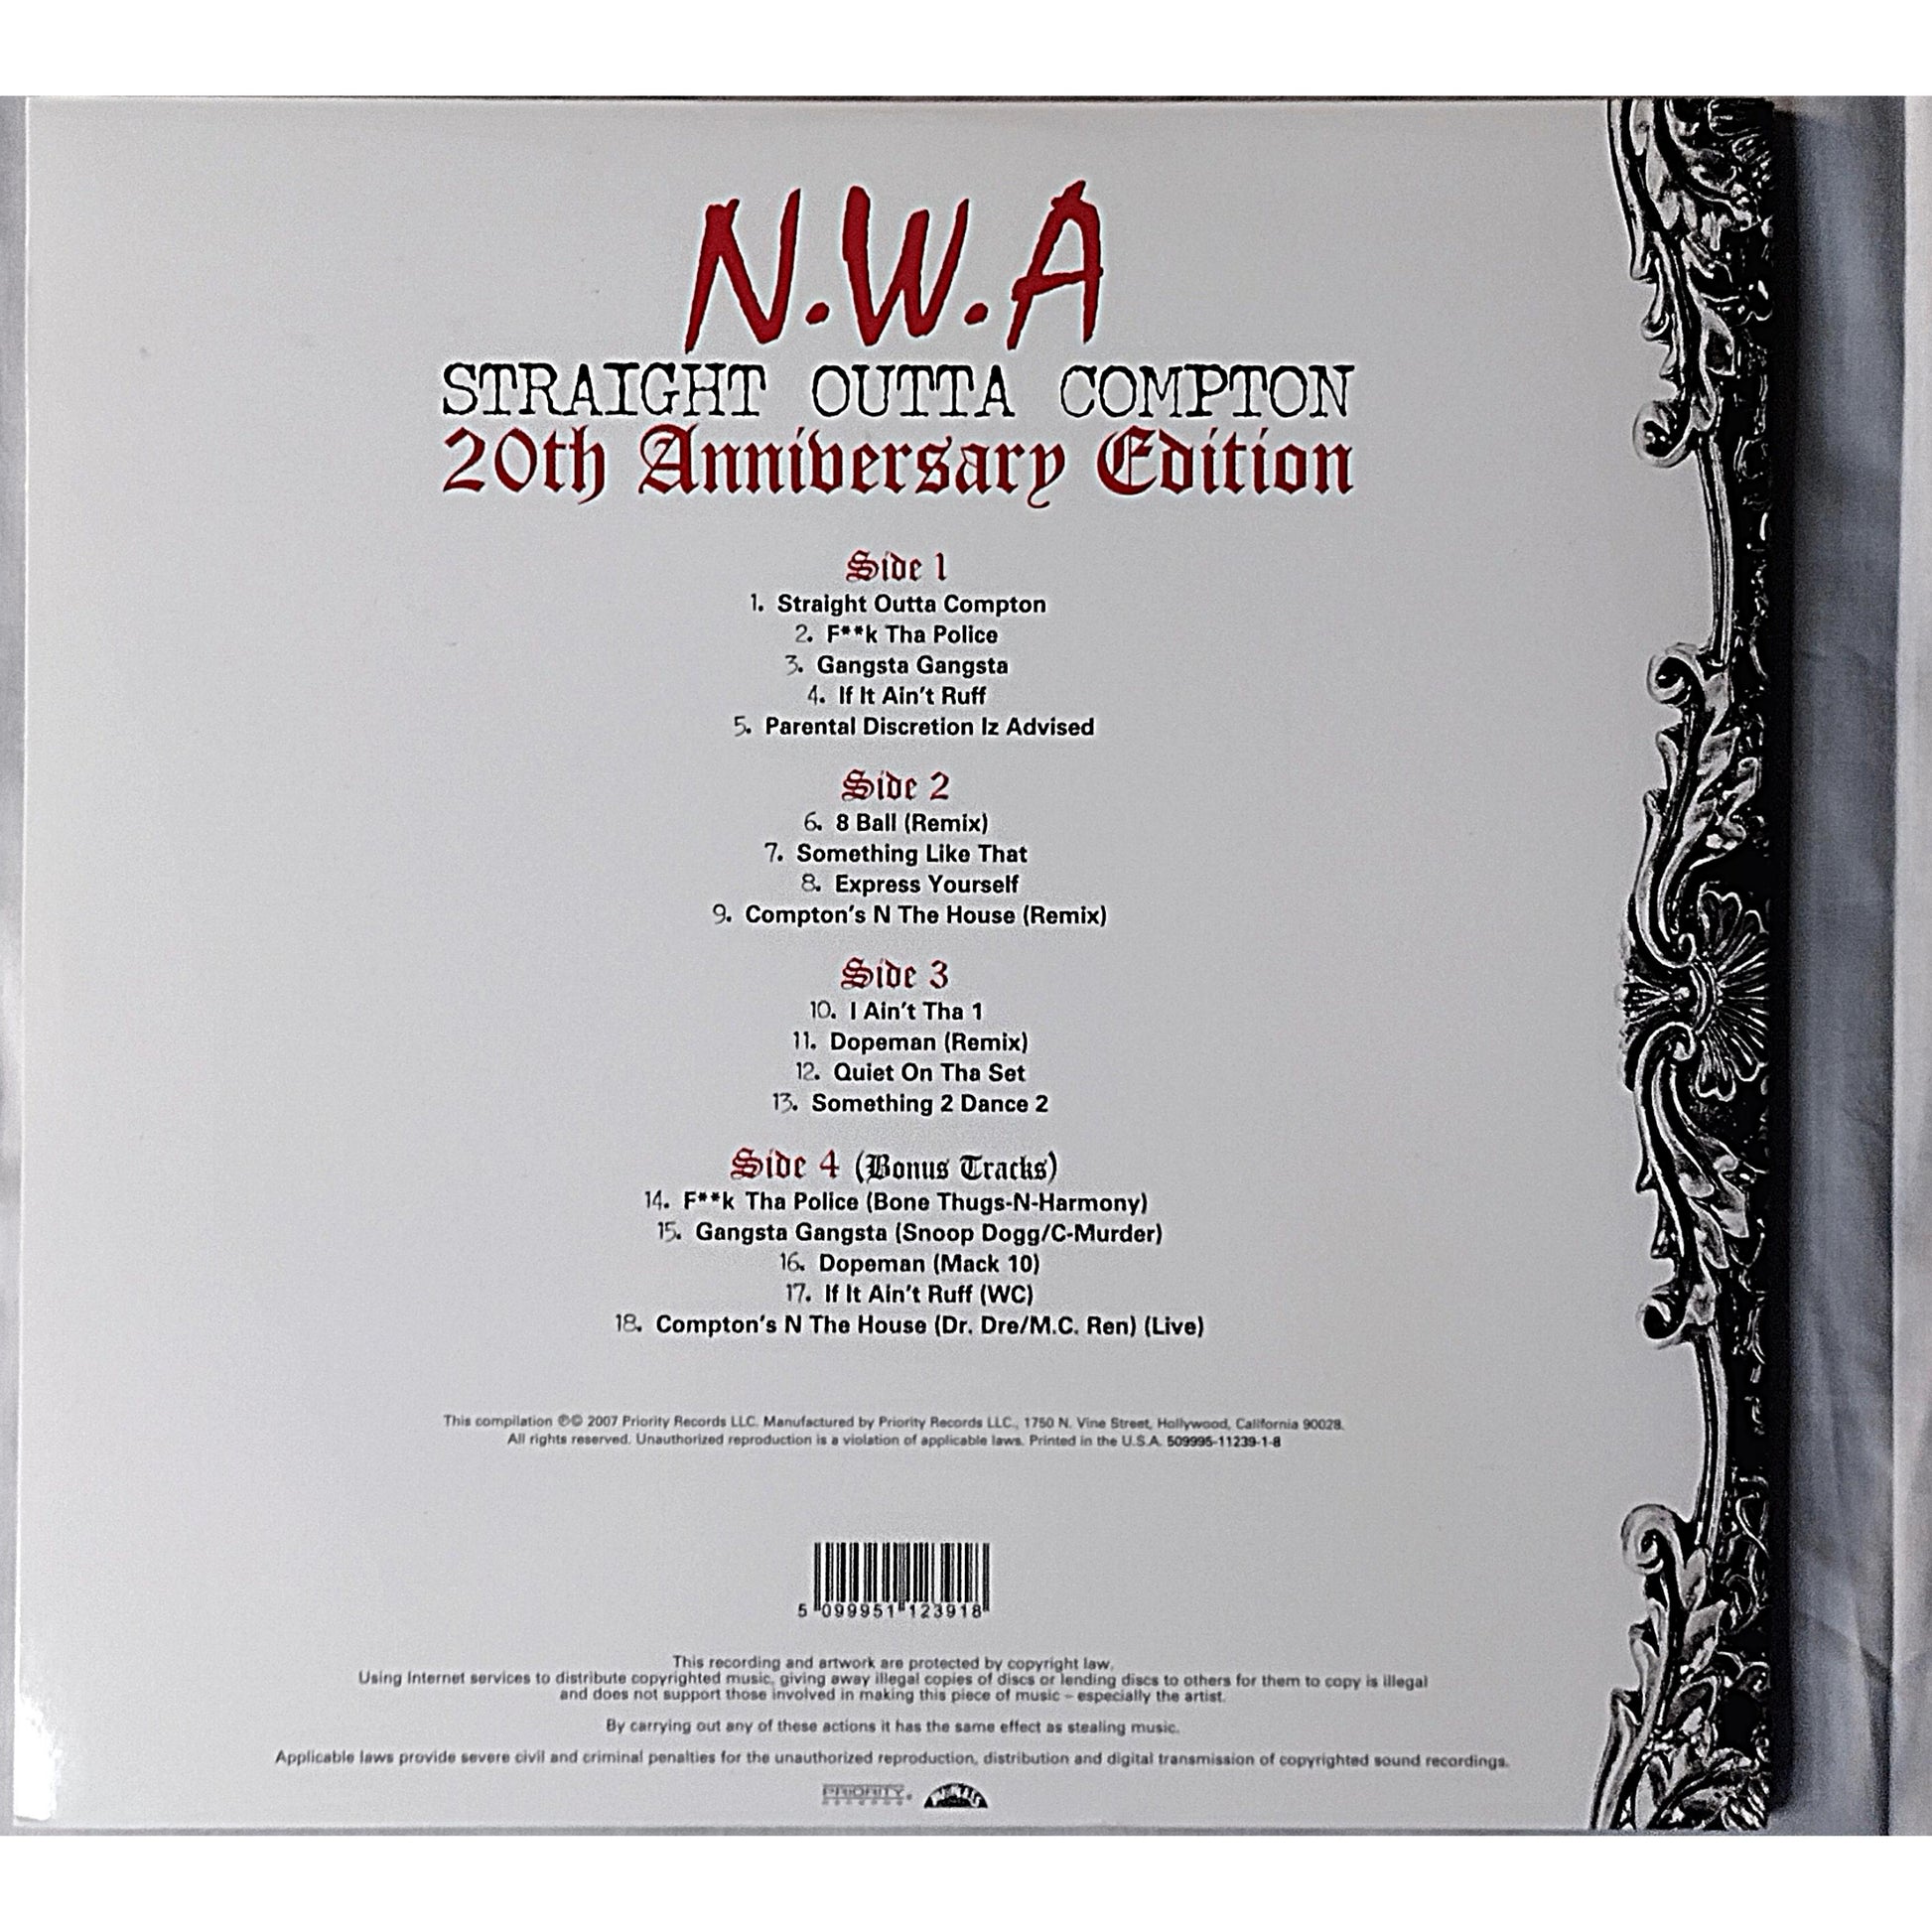 Music- Autographed- Ice Cube and DJ Yella Signed NWA Straight Outta Compton 20th Anniversary Edition Vinyl Record Album Cover Beckett BAS Authentication 104